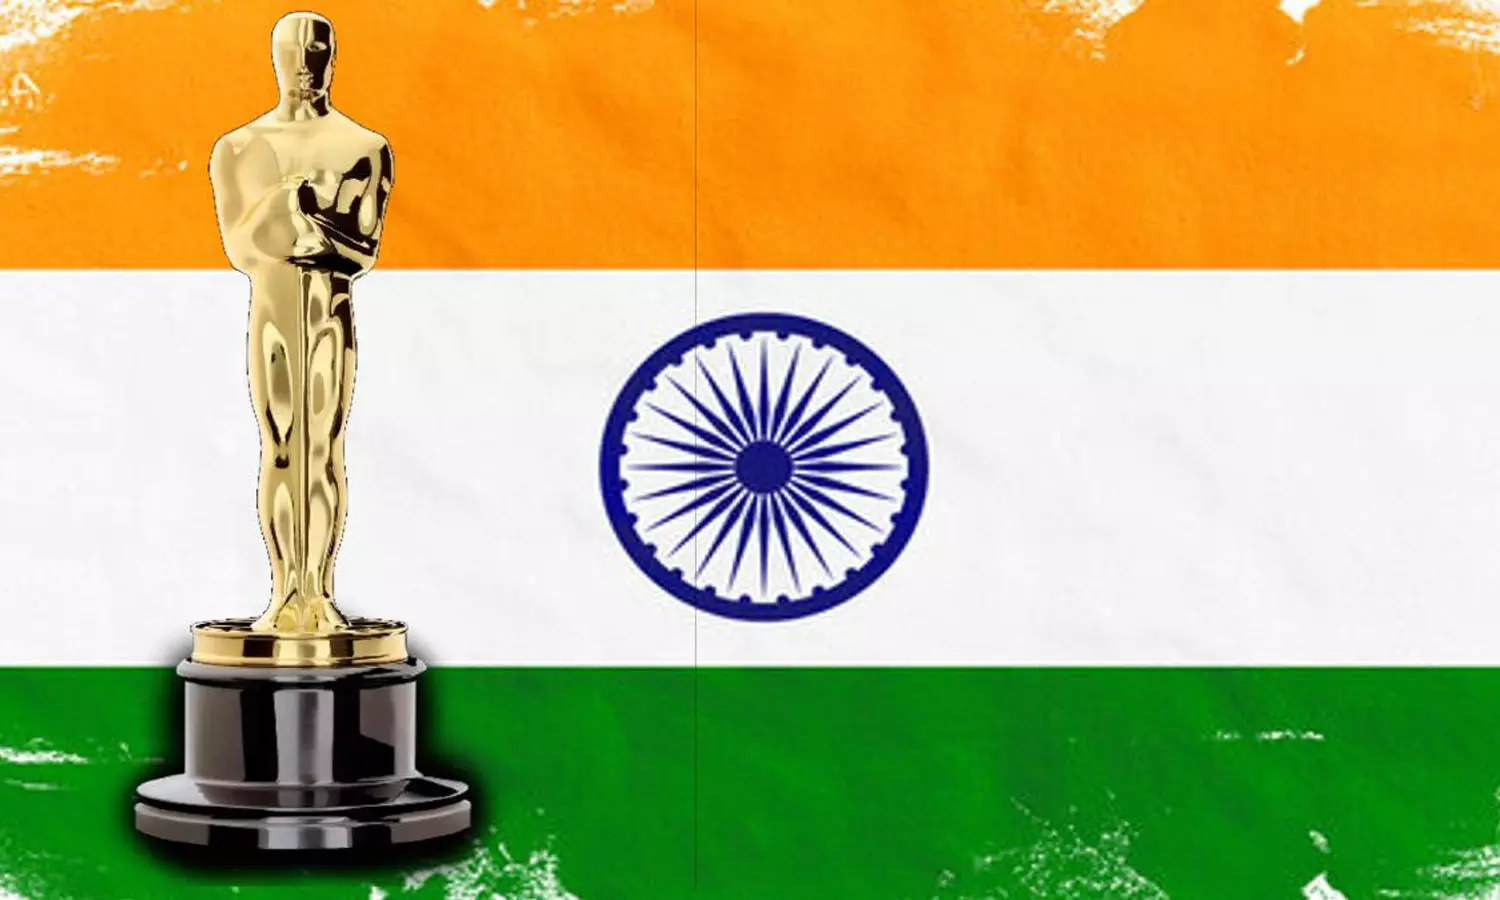 Have a look at the IMDb ratings of Oscar-nominated Indian films